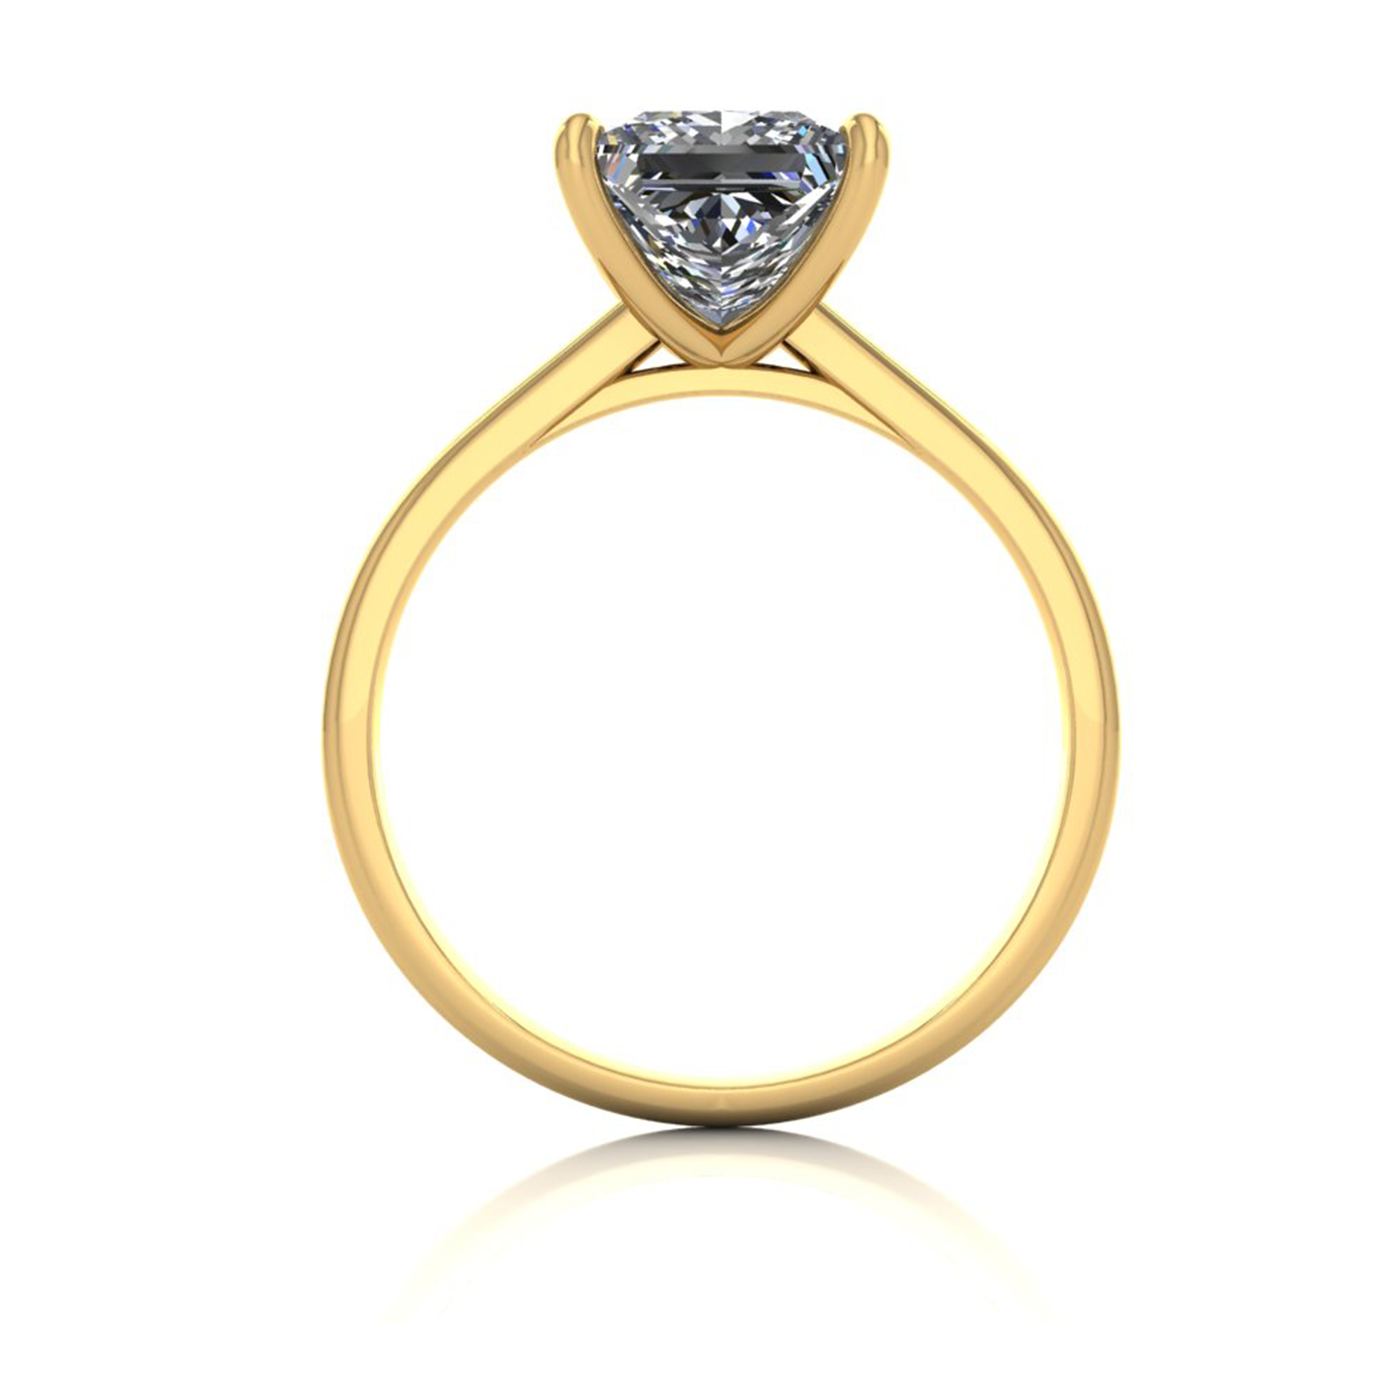 18k yellow gold  2,00 ct 4 prongs solitaire princess cut diamond engagement ring with whisper thin band